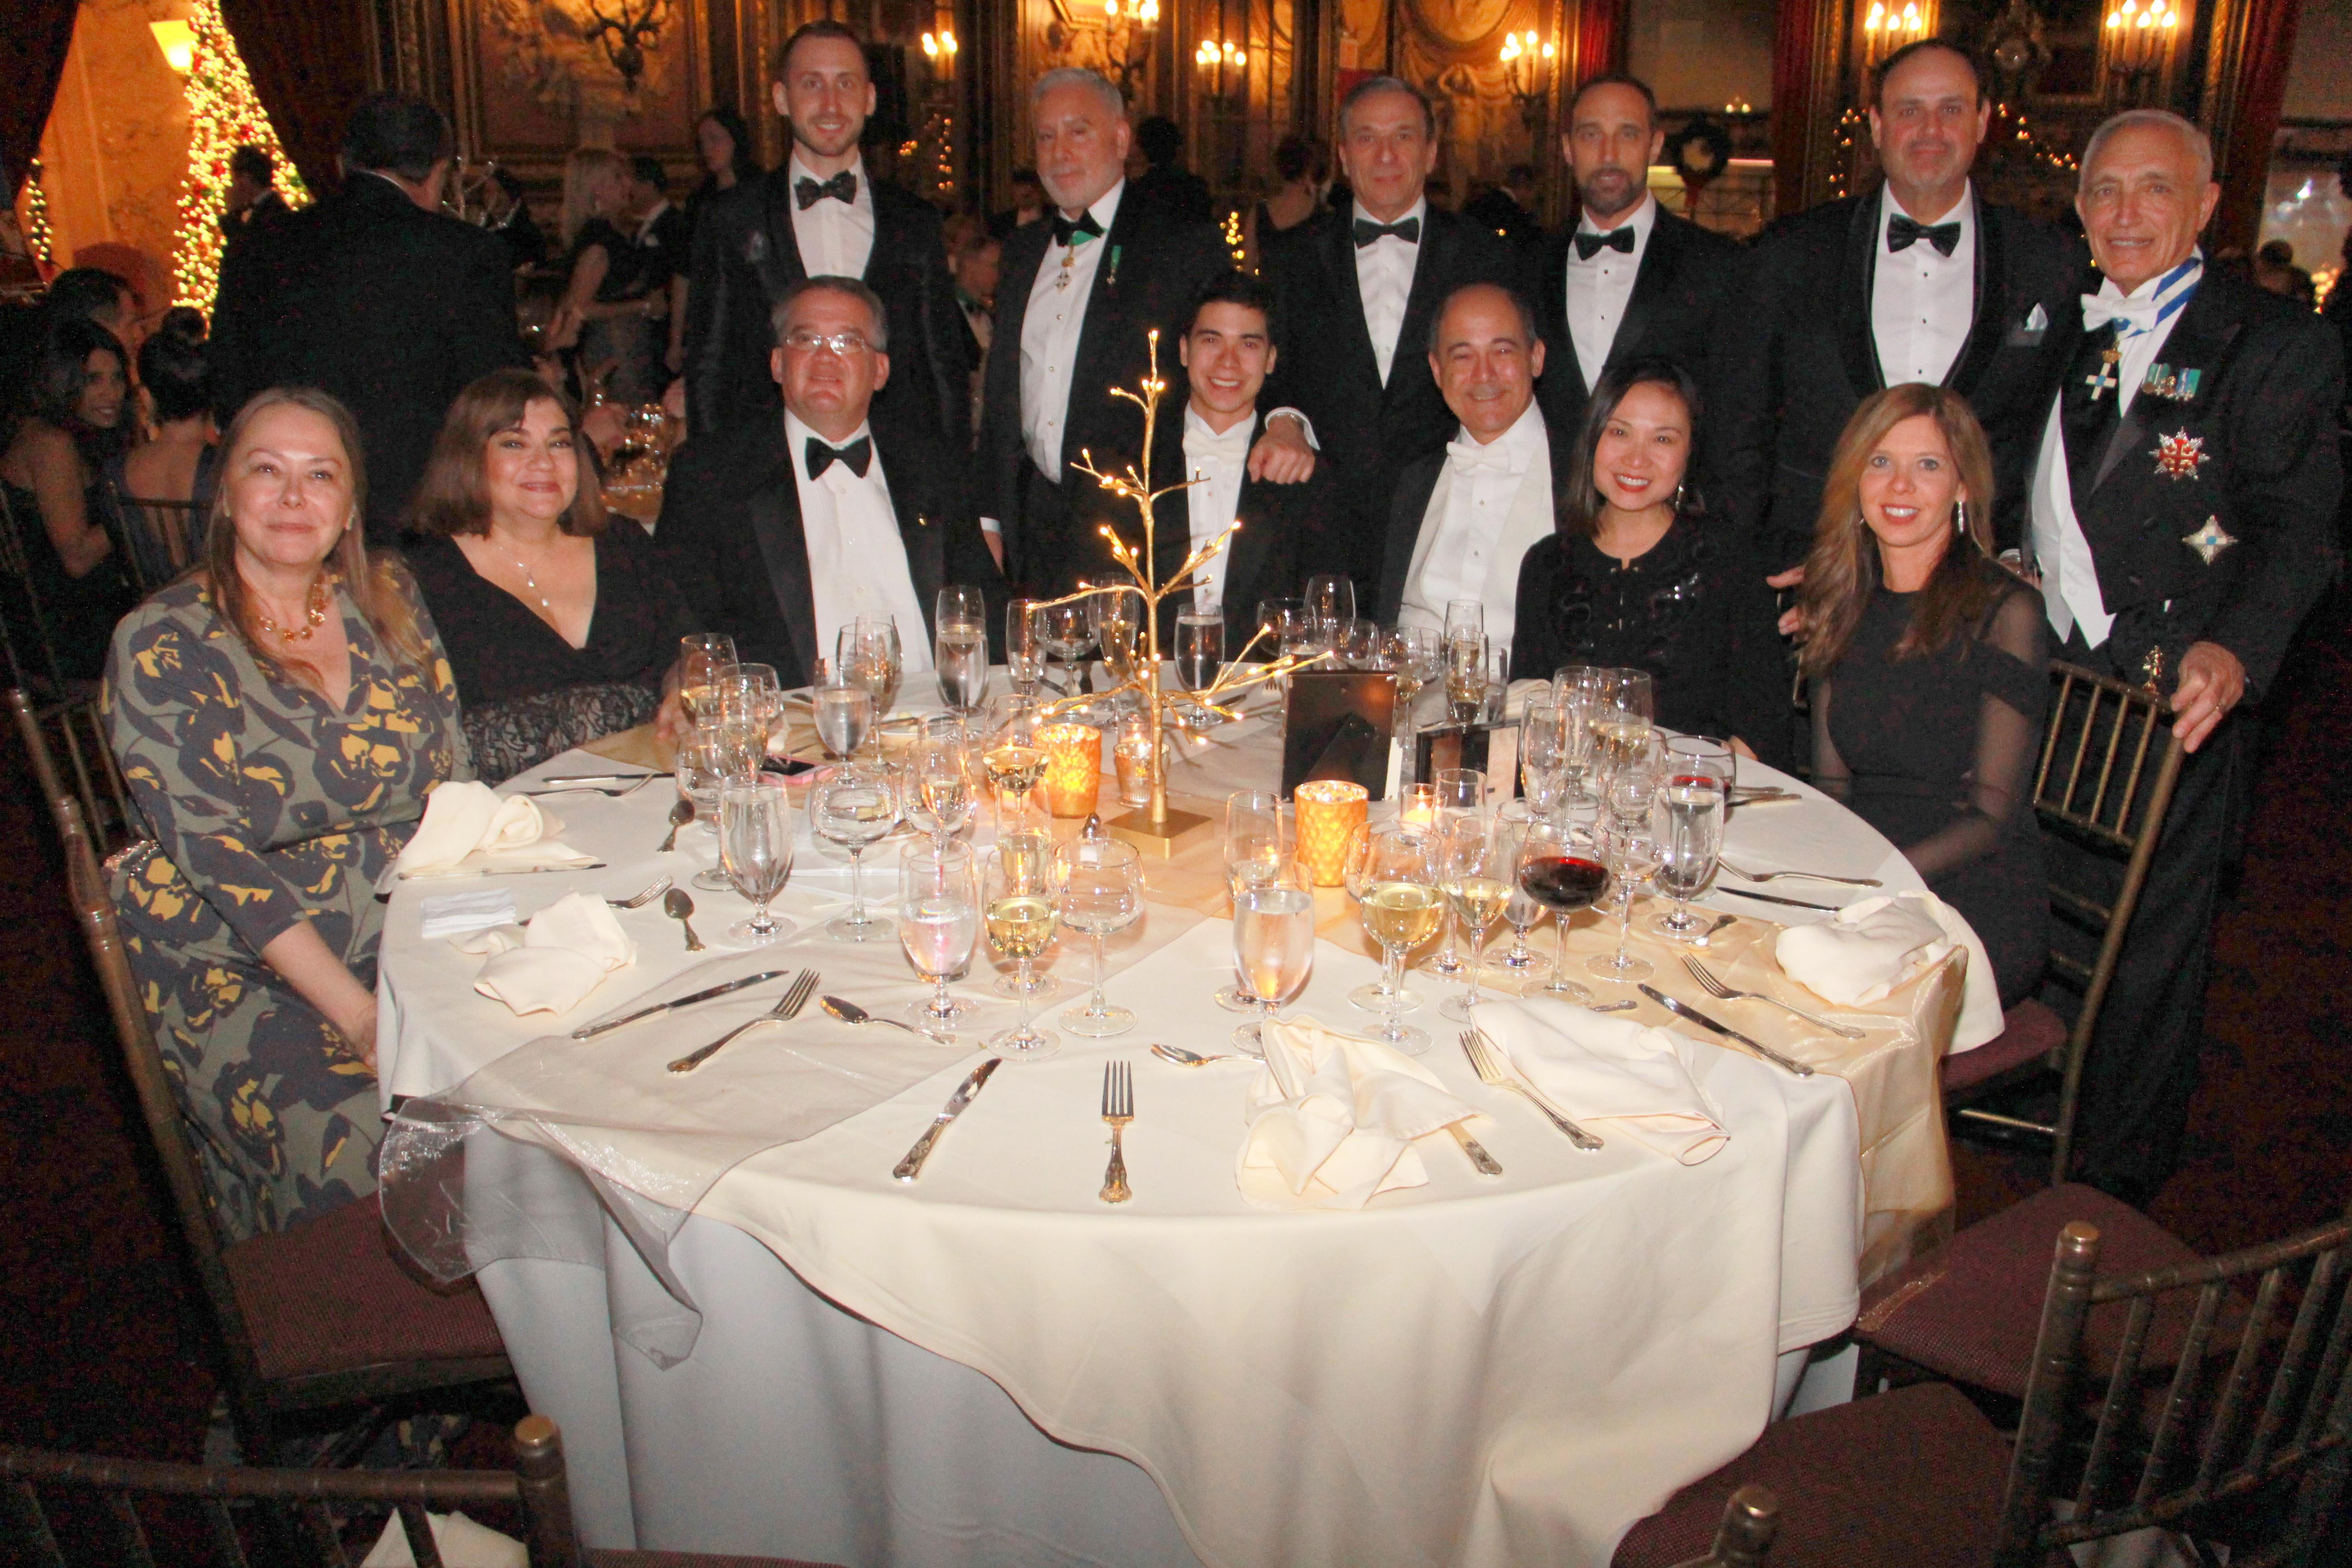 Savoy Ball Benefactor Table of Louis Benza, Esq. and Dr. Raymond Benza